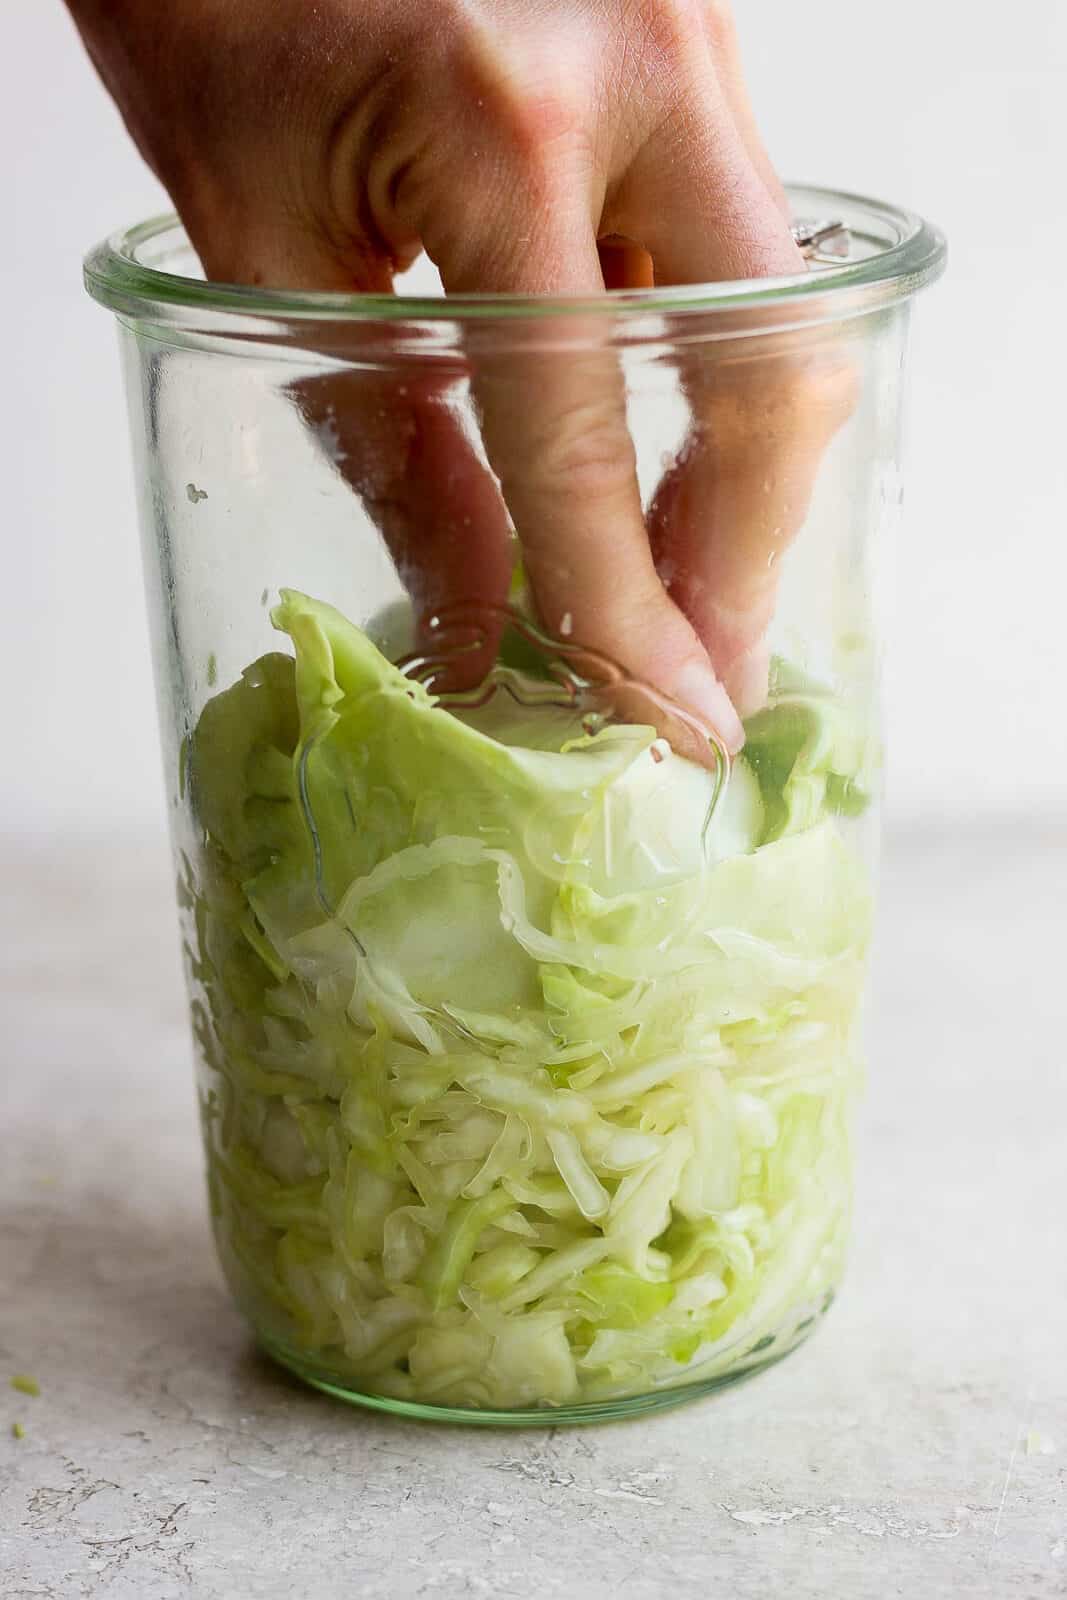 A hand pressing cabbage down in the mason jar.